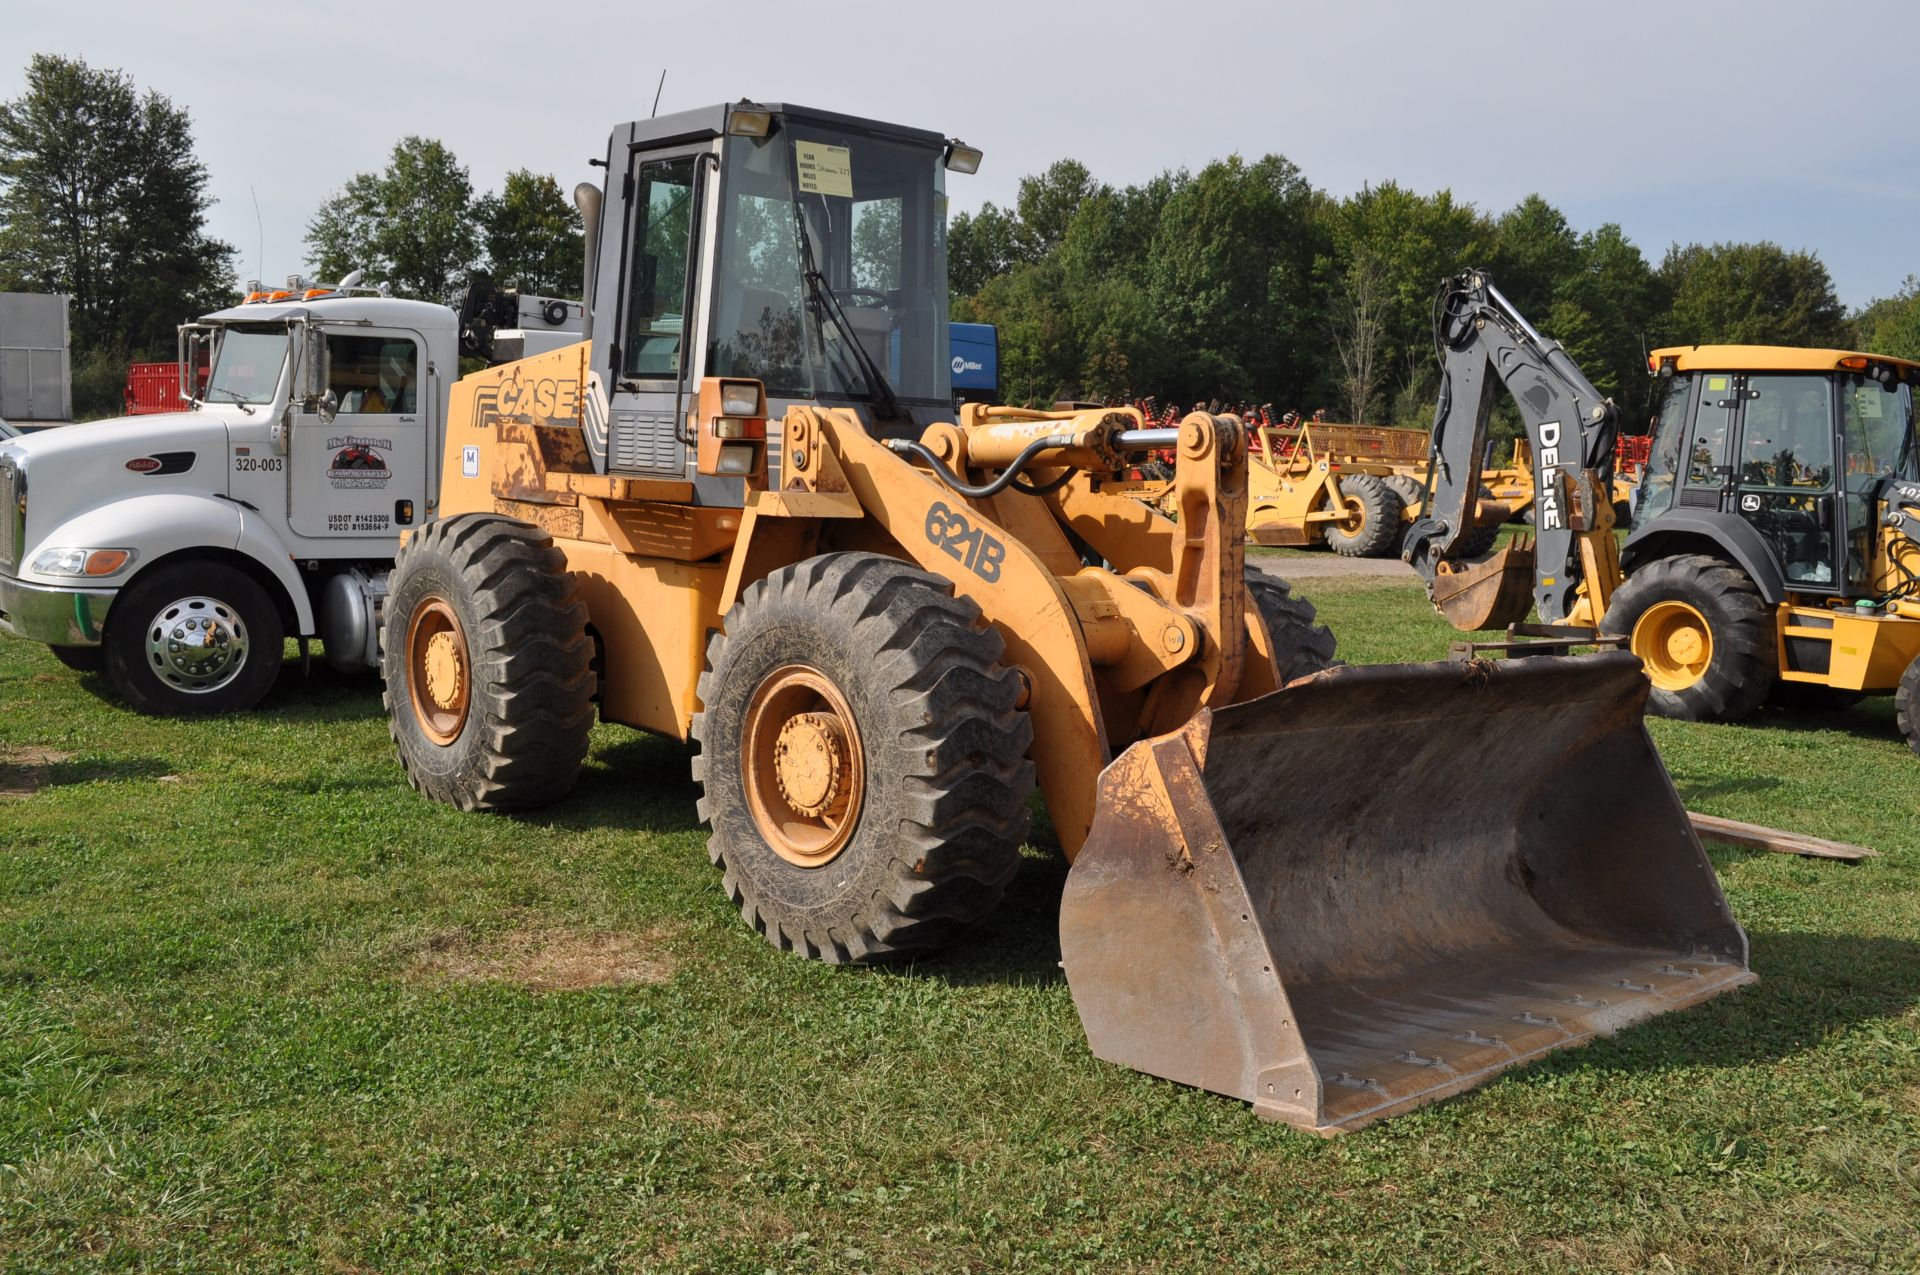 Case 621B payloader, C/H/A, 20.5-25 tires, 102” bucket, hyd quick attach, self-leveling - Image 2 of 23